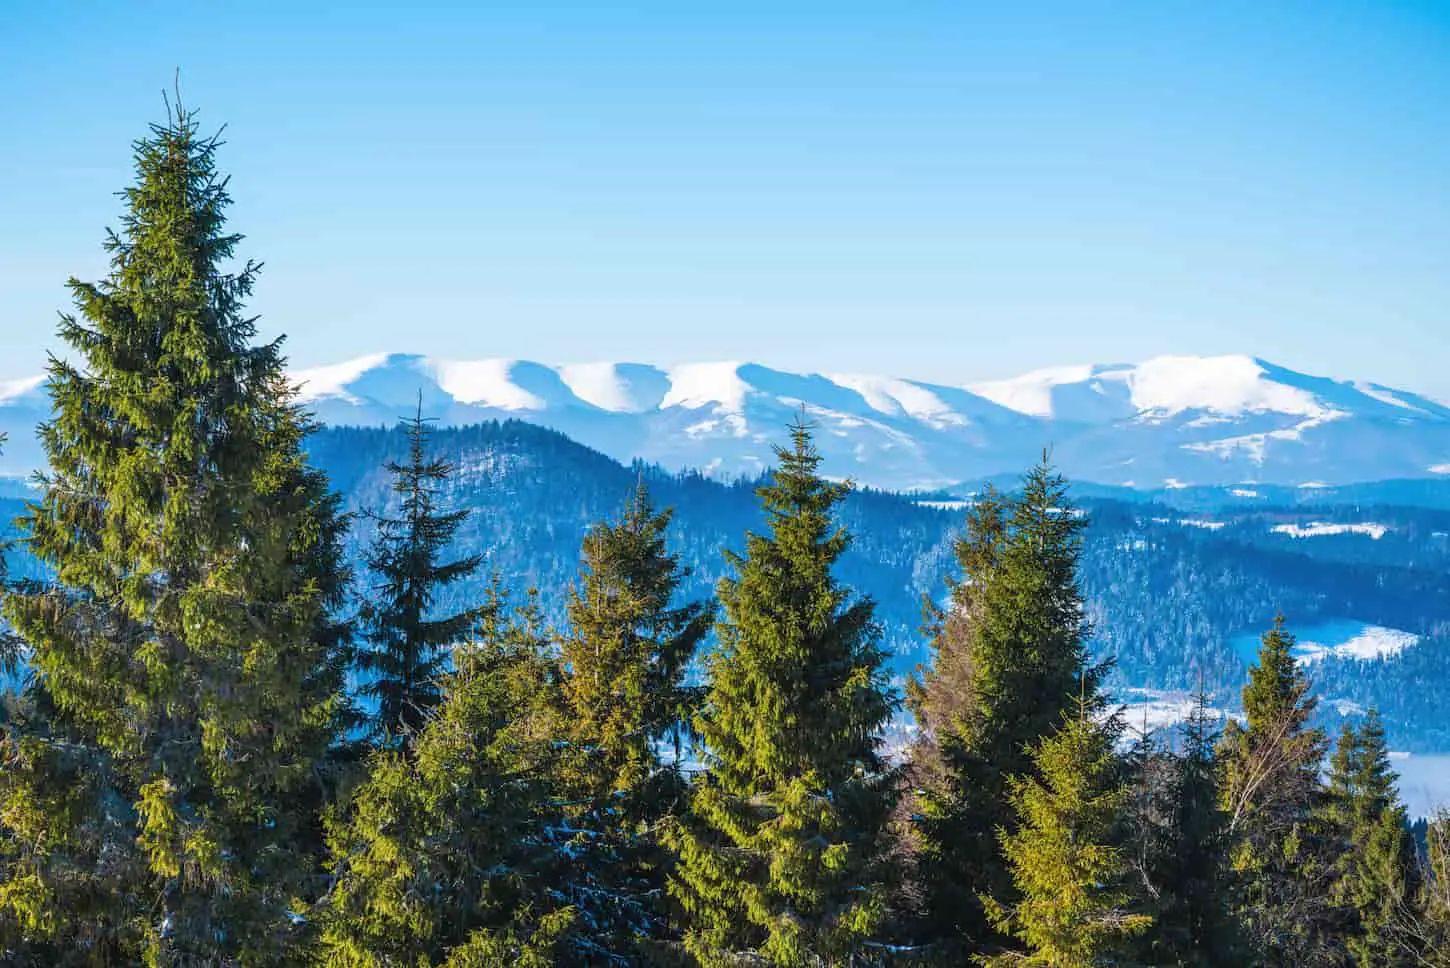 An image of a Spruce winter forest overlooking the mountains. Beautiful winter nature. The Carpathian Mountains in the background.